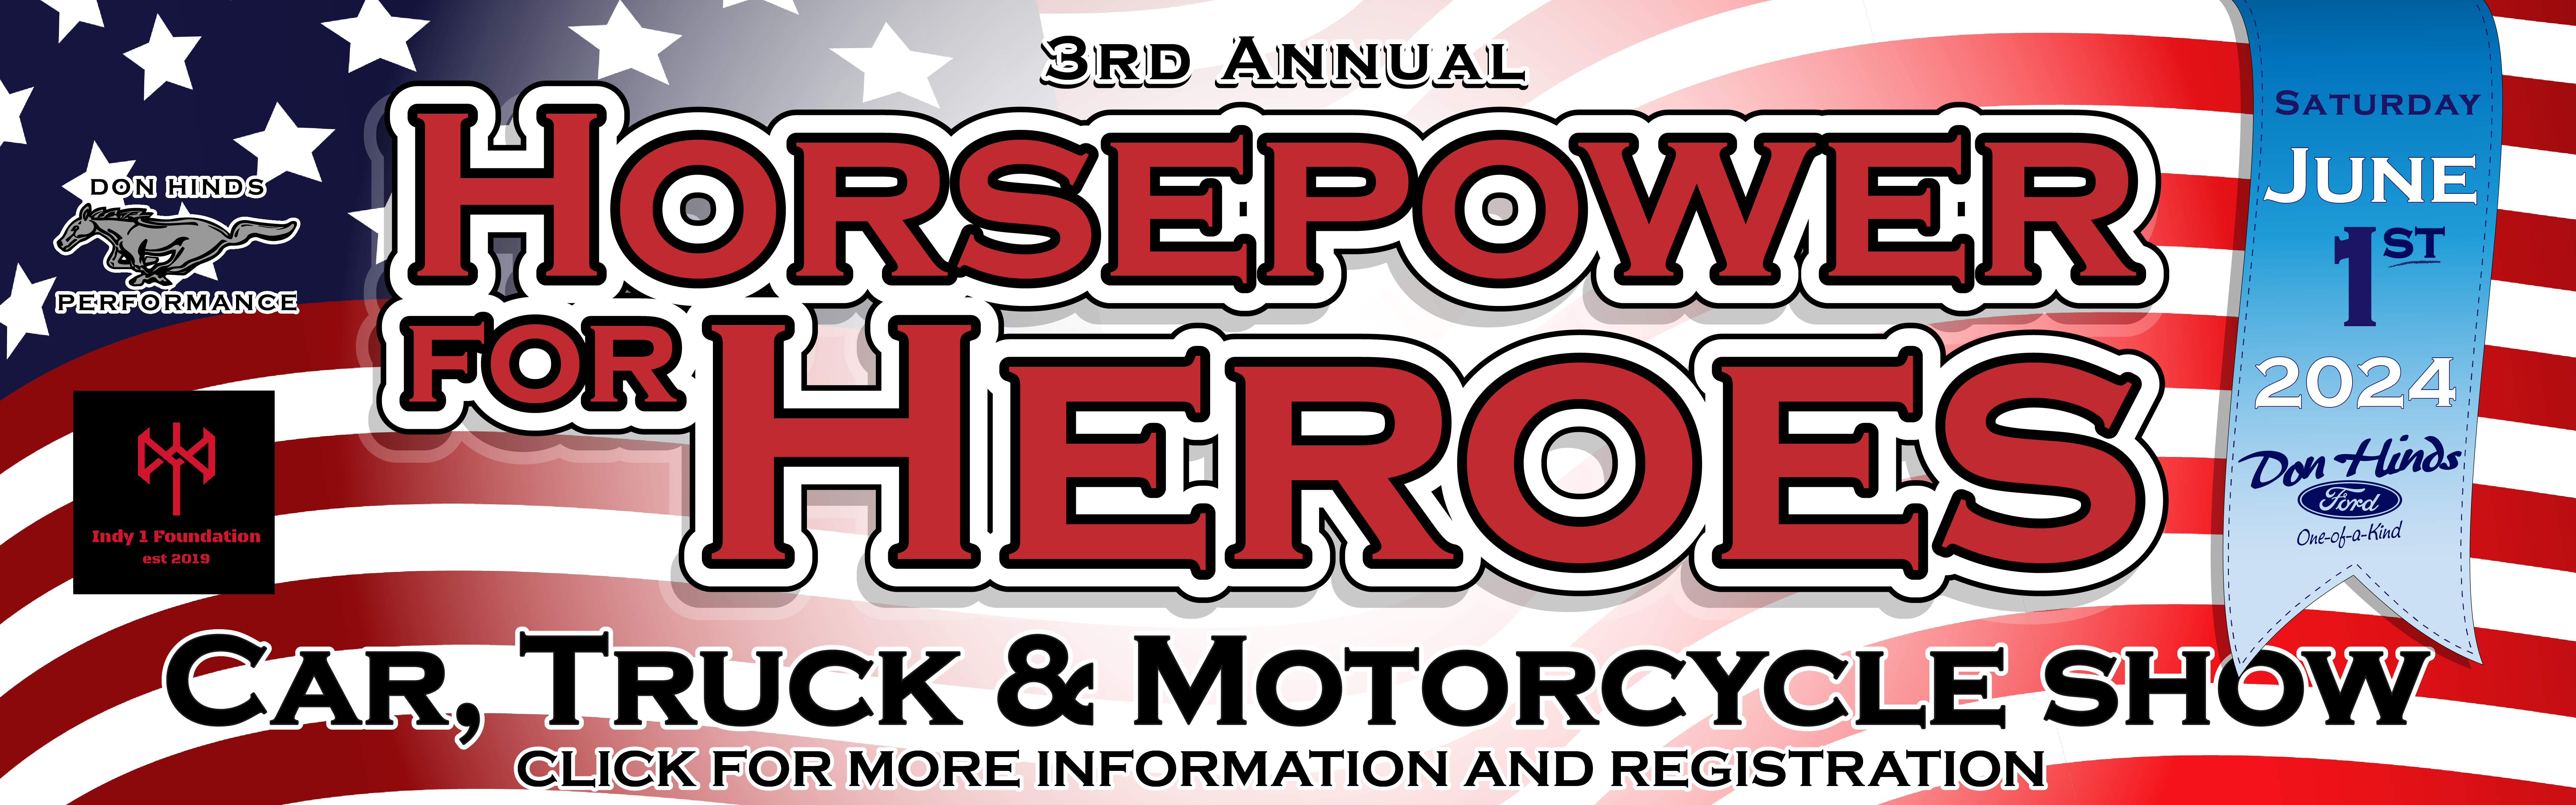 flag banner ad directing to Horsepower for heroes event page